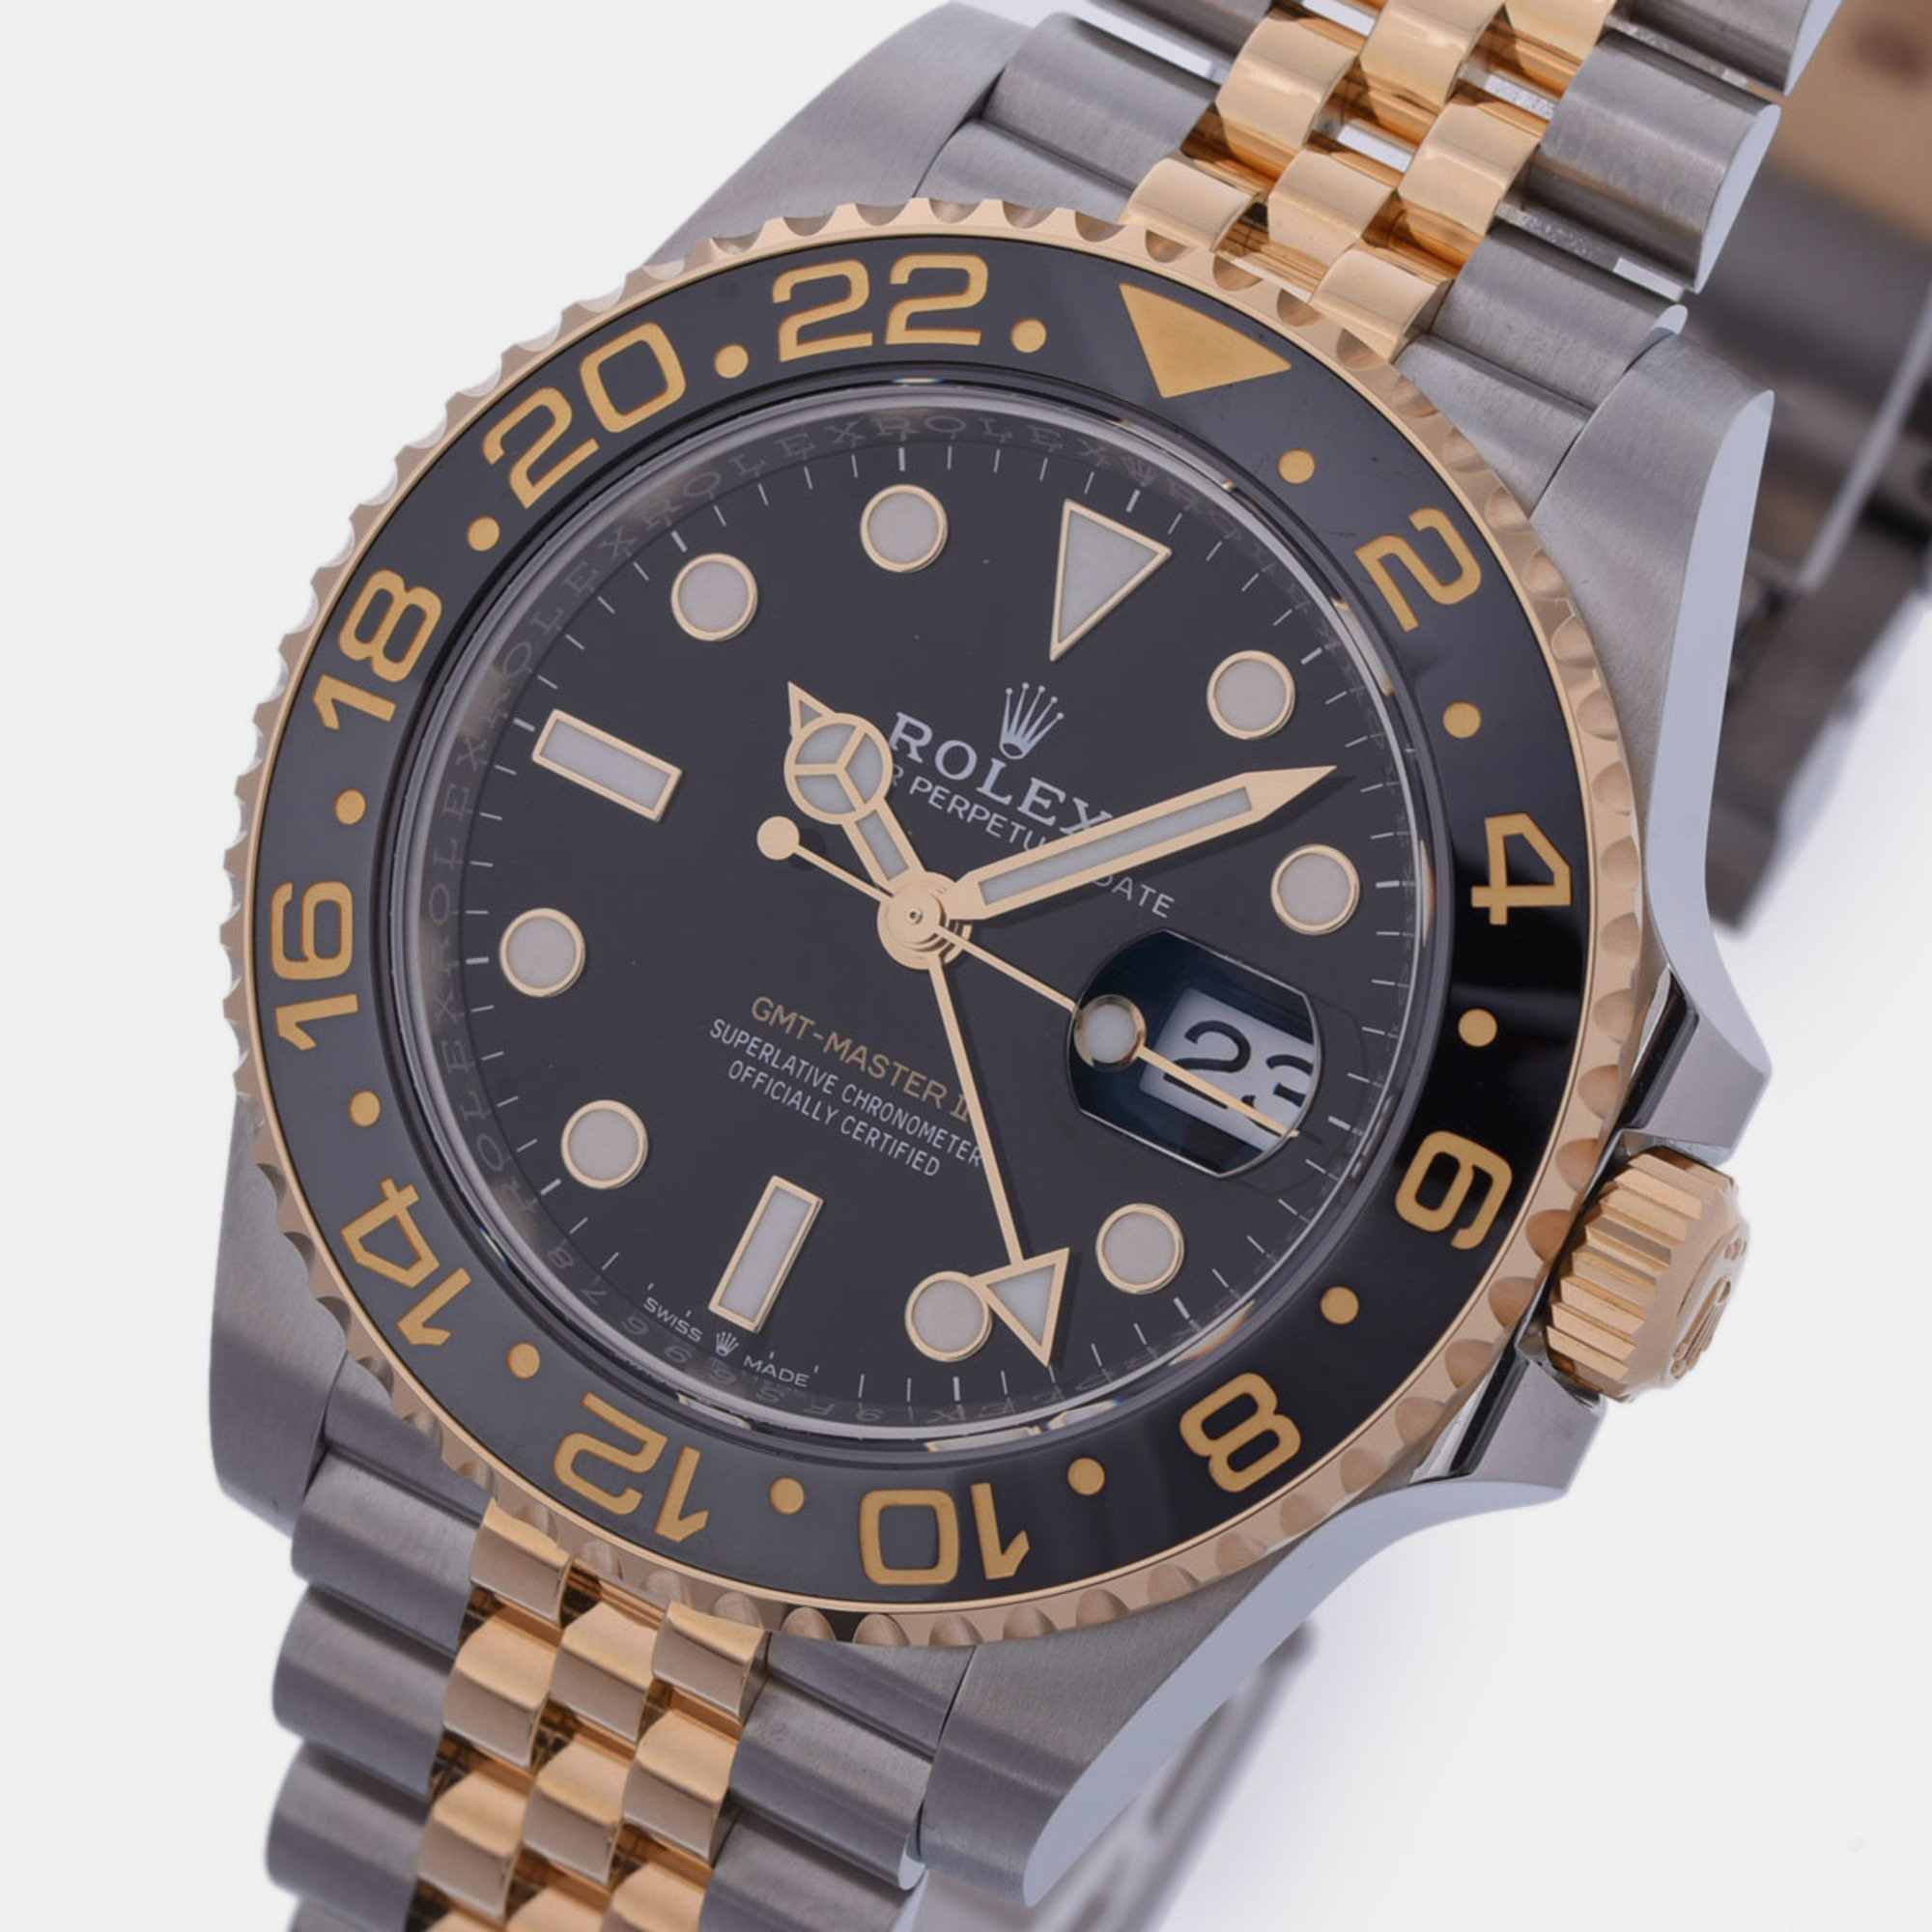 

Rolex Black 18k Yellow Gold And Stainless Steel GMT-Master II 126713 Automatic Men's Wristwatch 40 mm